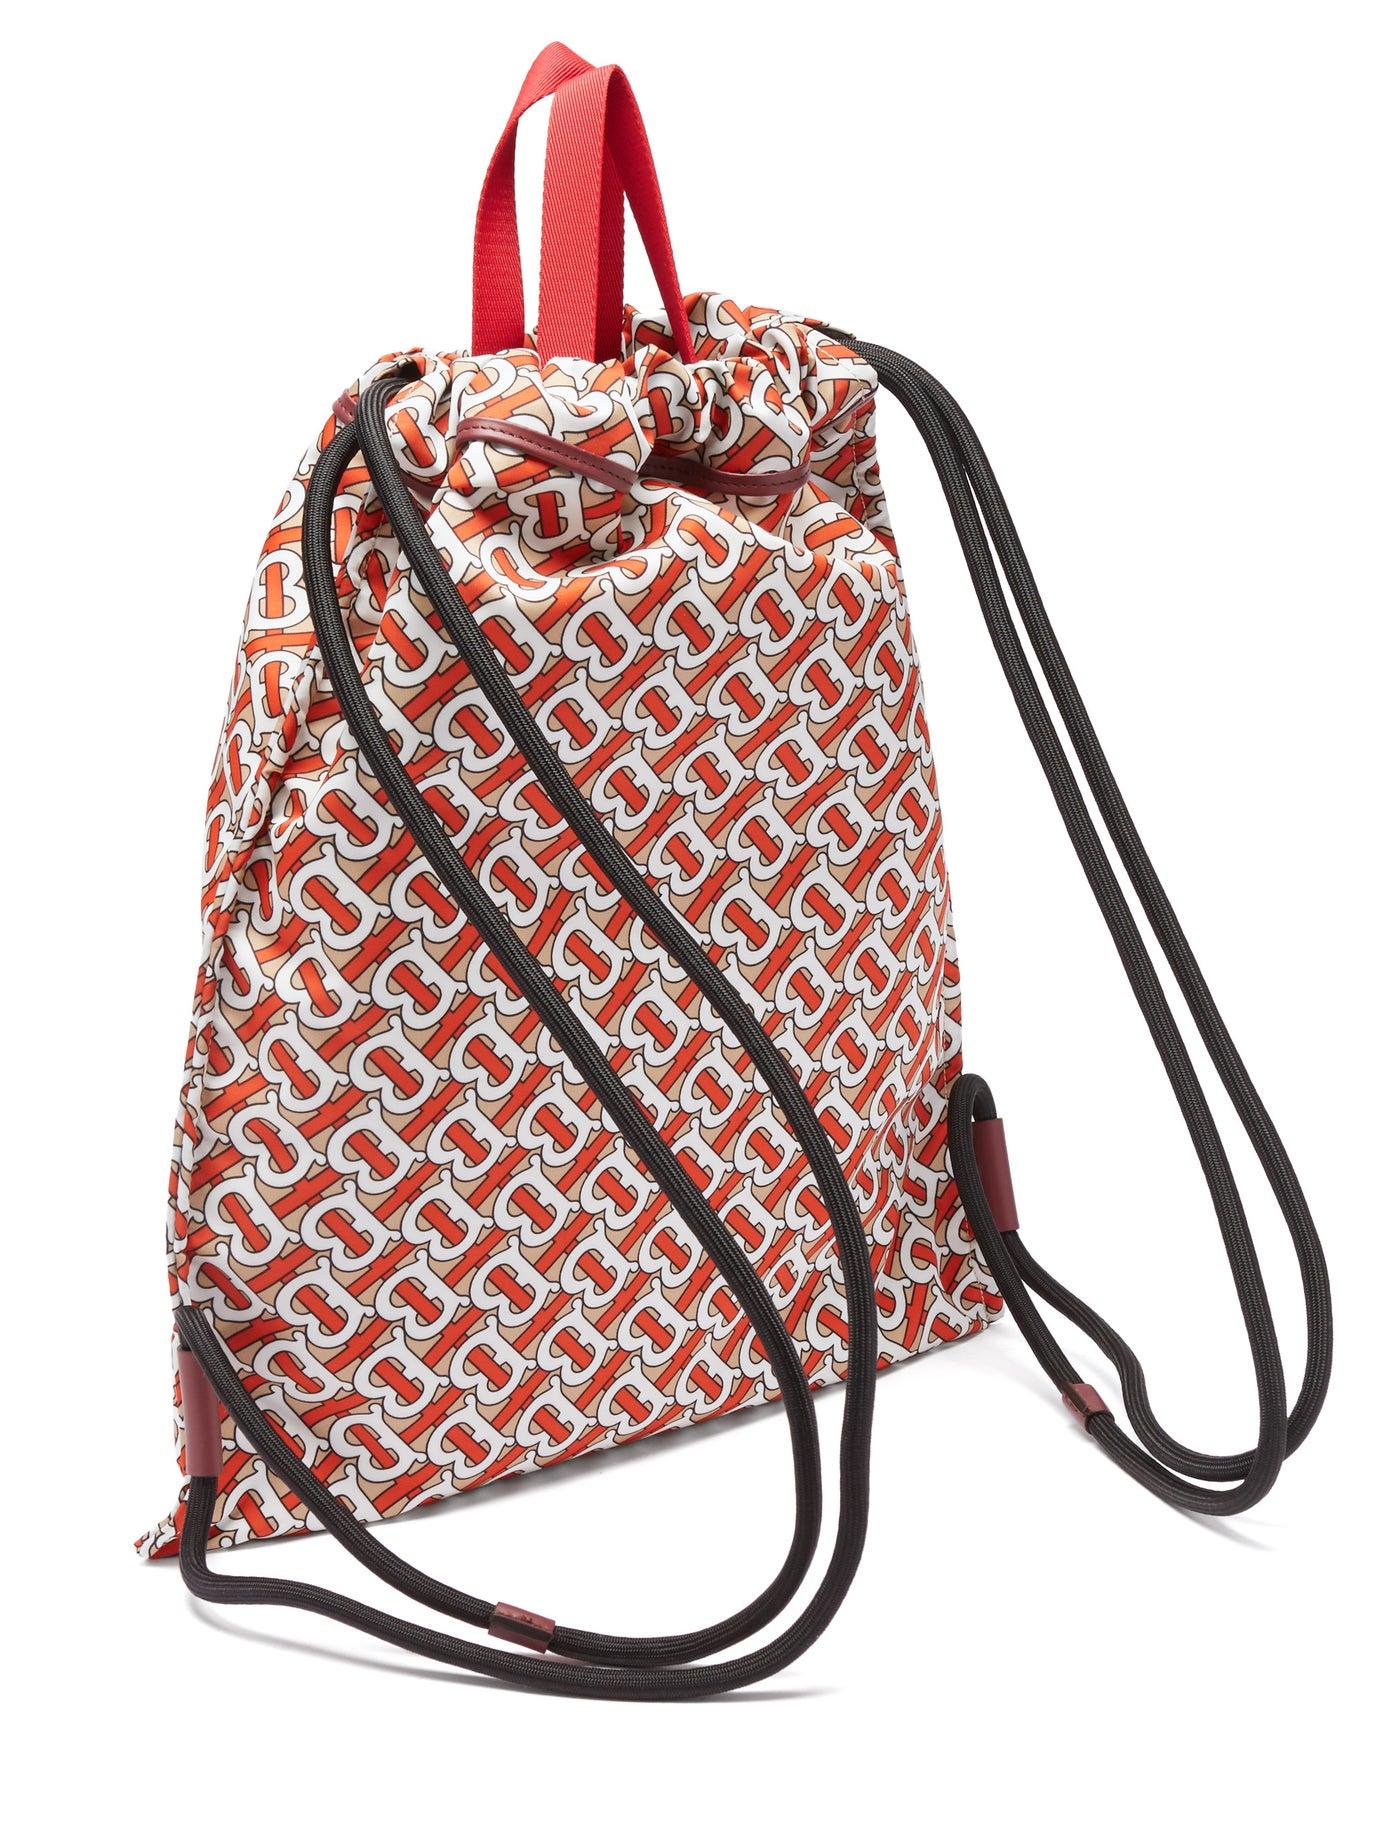 Burberry Leather Bobby Tb-print Drawstring Backpack in Red for Men - Lyst